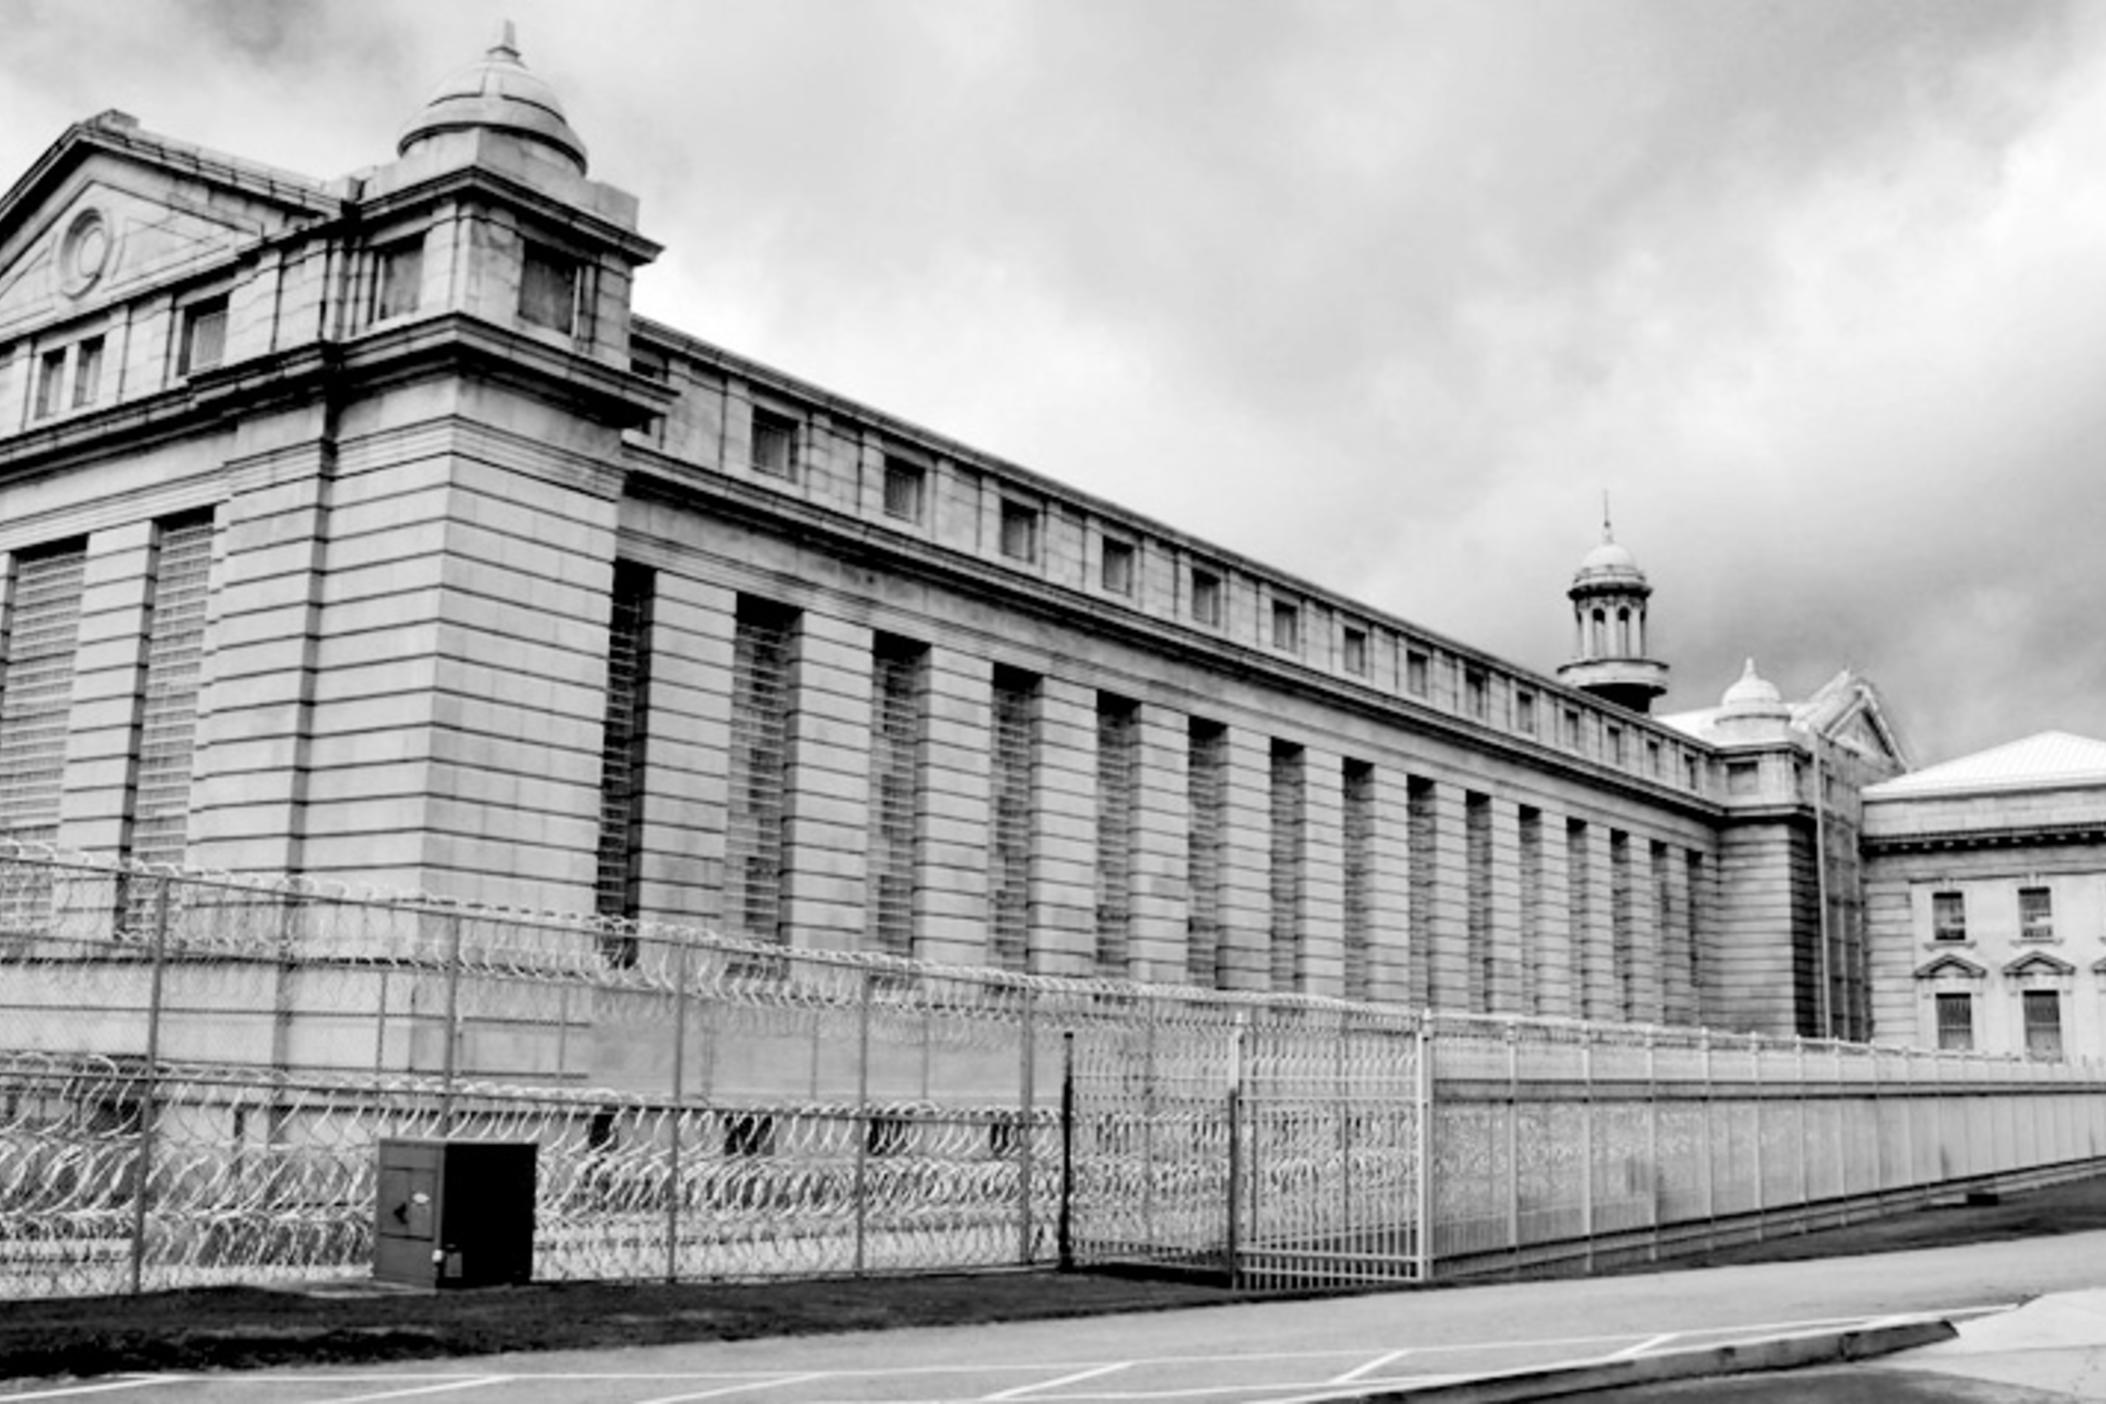 A U.S. Senate investigation found that inmates at the Atlanta Federal Penitentiary were routinely denied nutrition, clean drinking water, hygiene products and proper medical care. The report found that cells were infested with rats and roaches. 